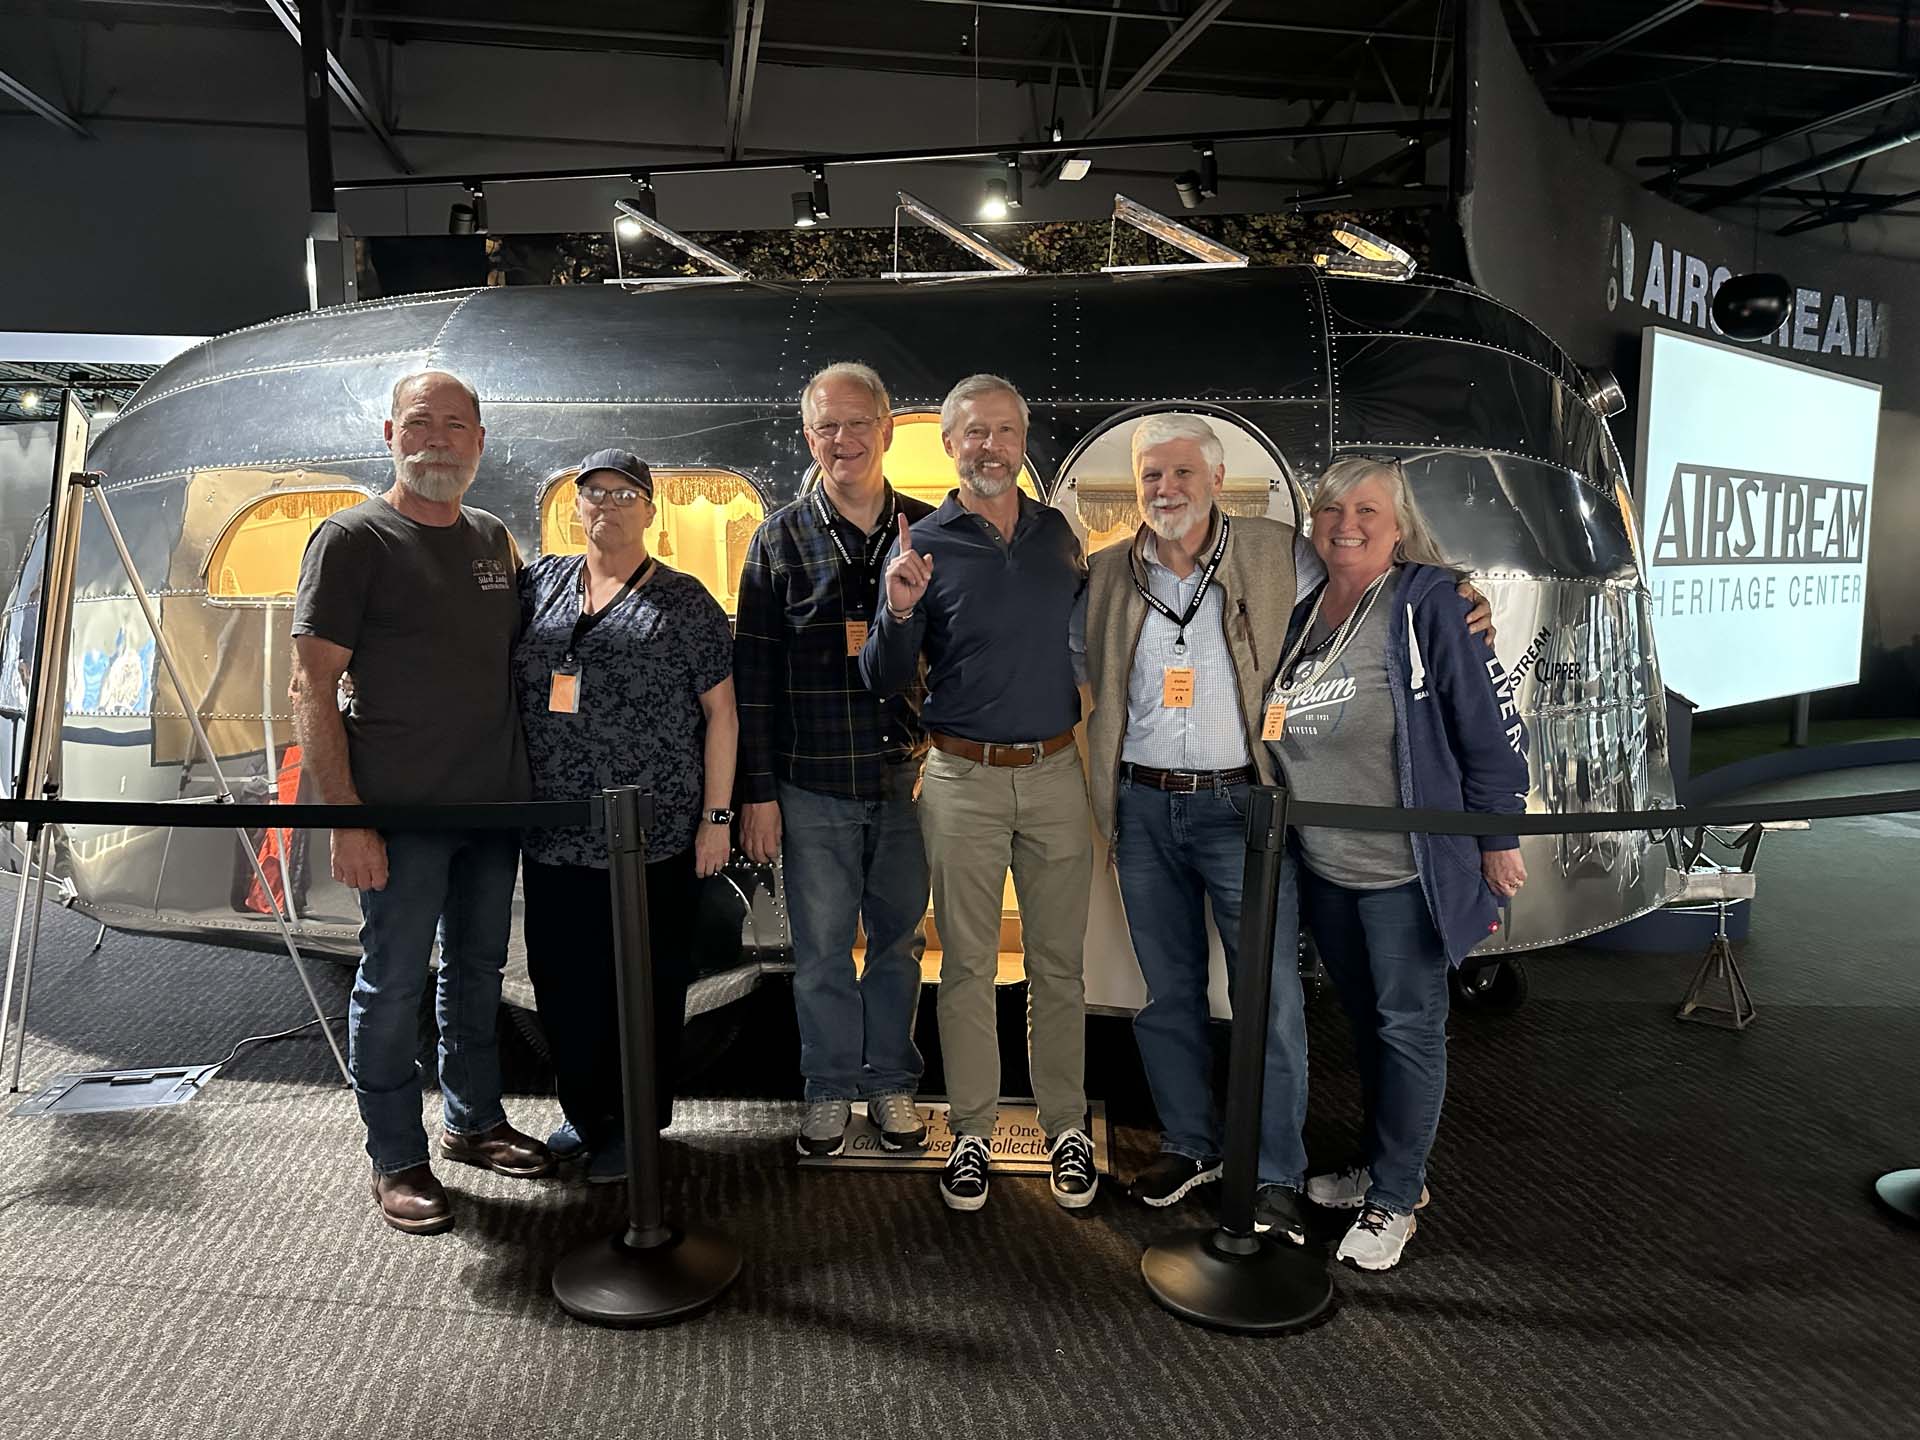 (L to R) Rick and Rose Larson of Silver Lady Restoration, Airstream historian Joe Peplinski, Airstream President & CEO Bob Wheeler, and David and Mary Gulley of the Gulley Collection